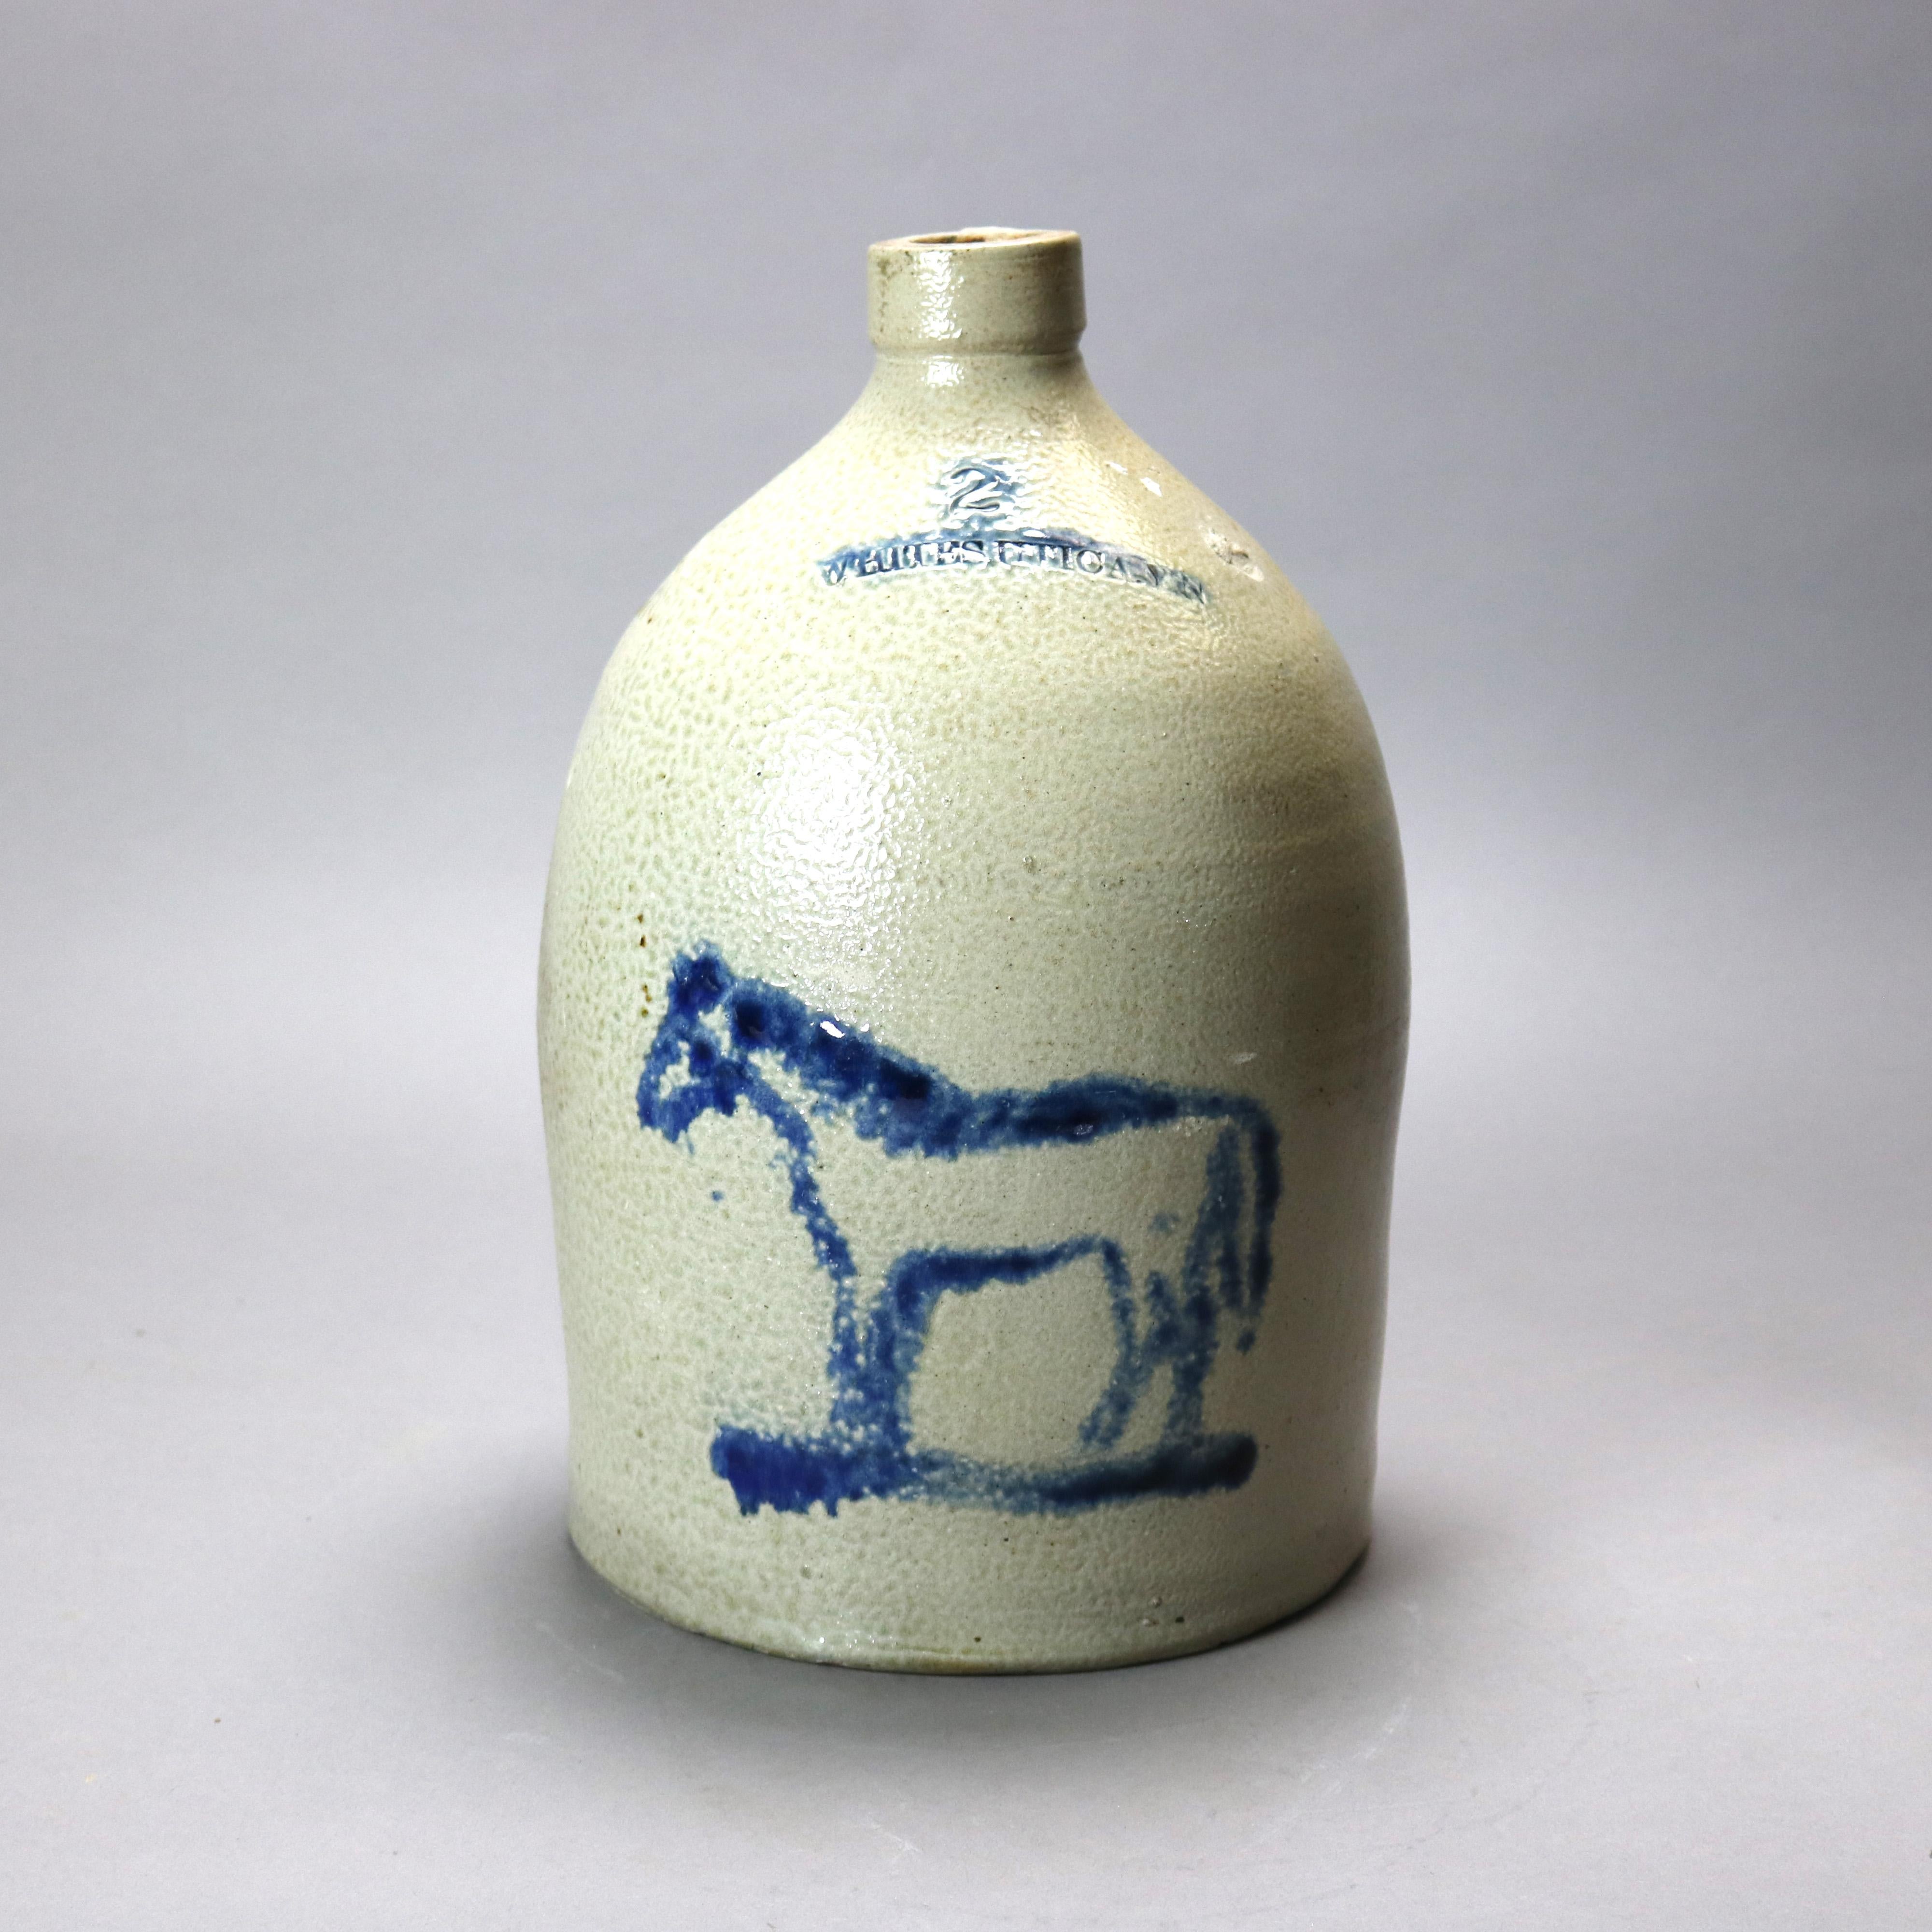 A rare antique two gallon stoneware jug by Whites of Utica, New York offers salt glazed stoneware construction cobalt blue decorated with horse, crock maker embossed with transposed NY as photographed, 19th century

Measures - 14''h x 9''w x 9''d.